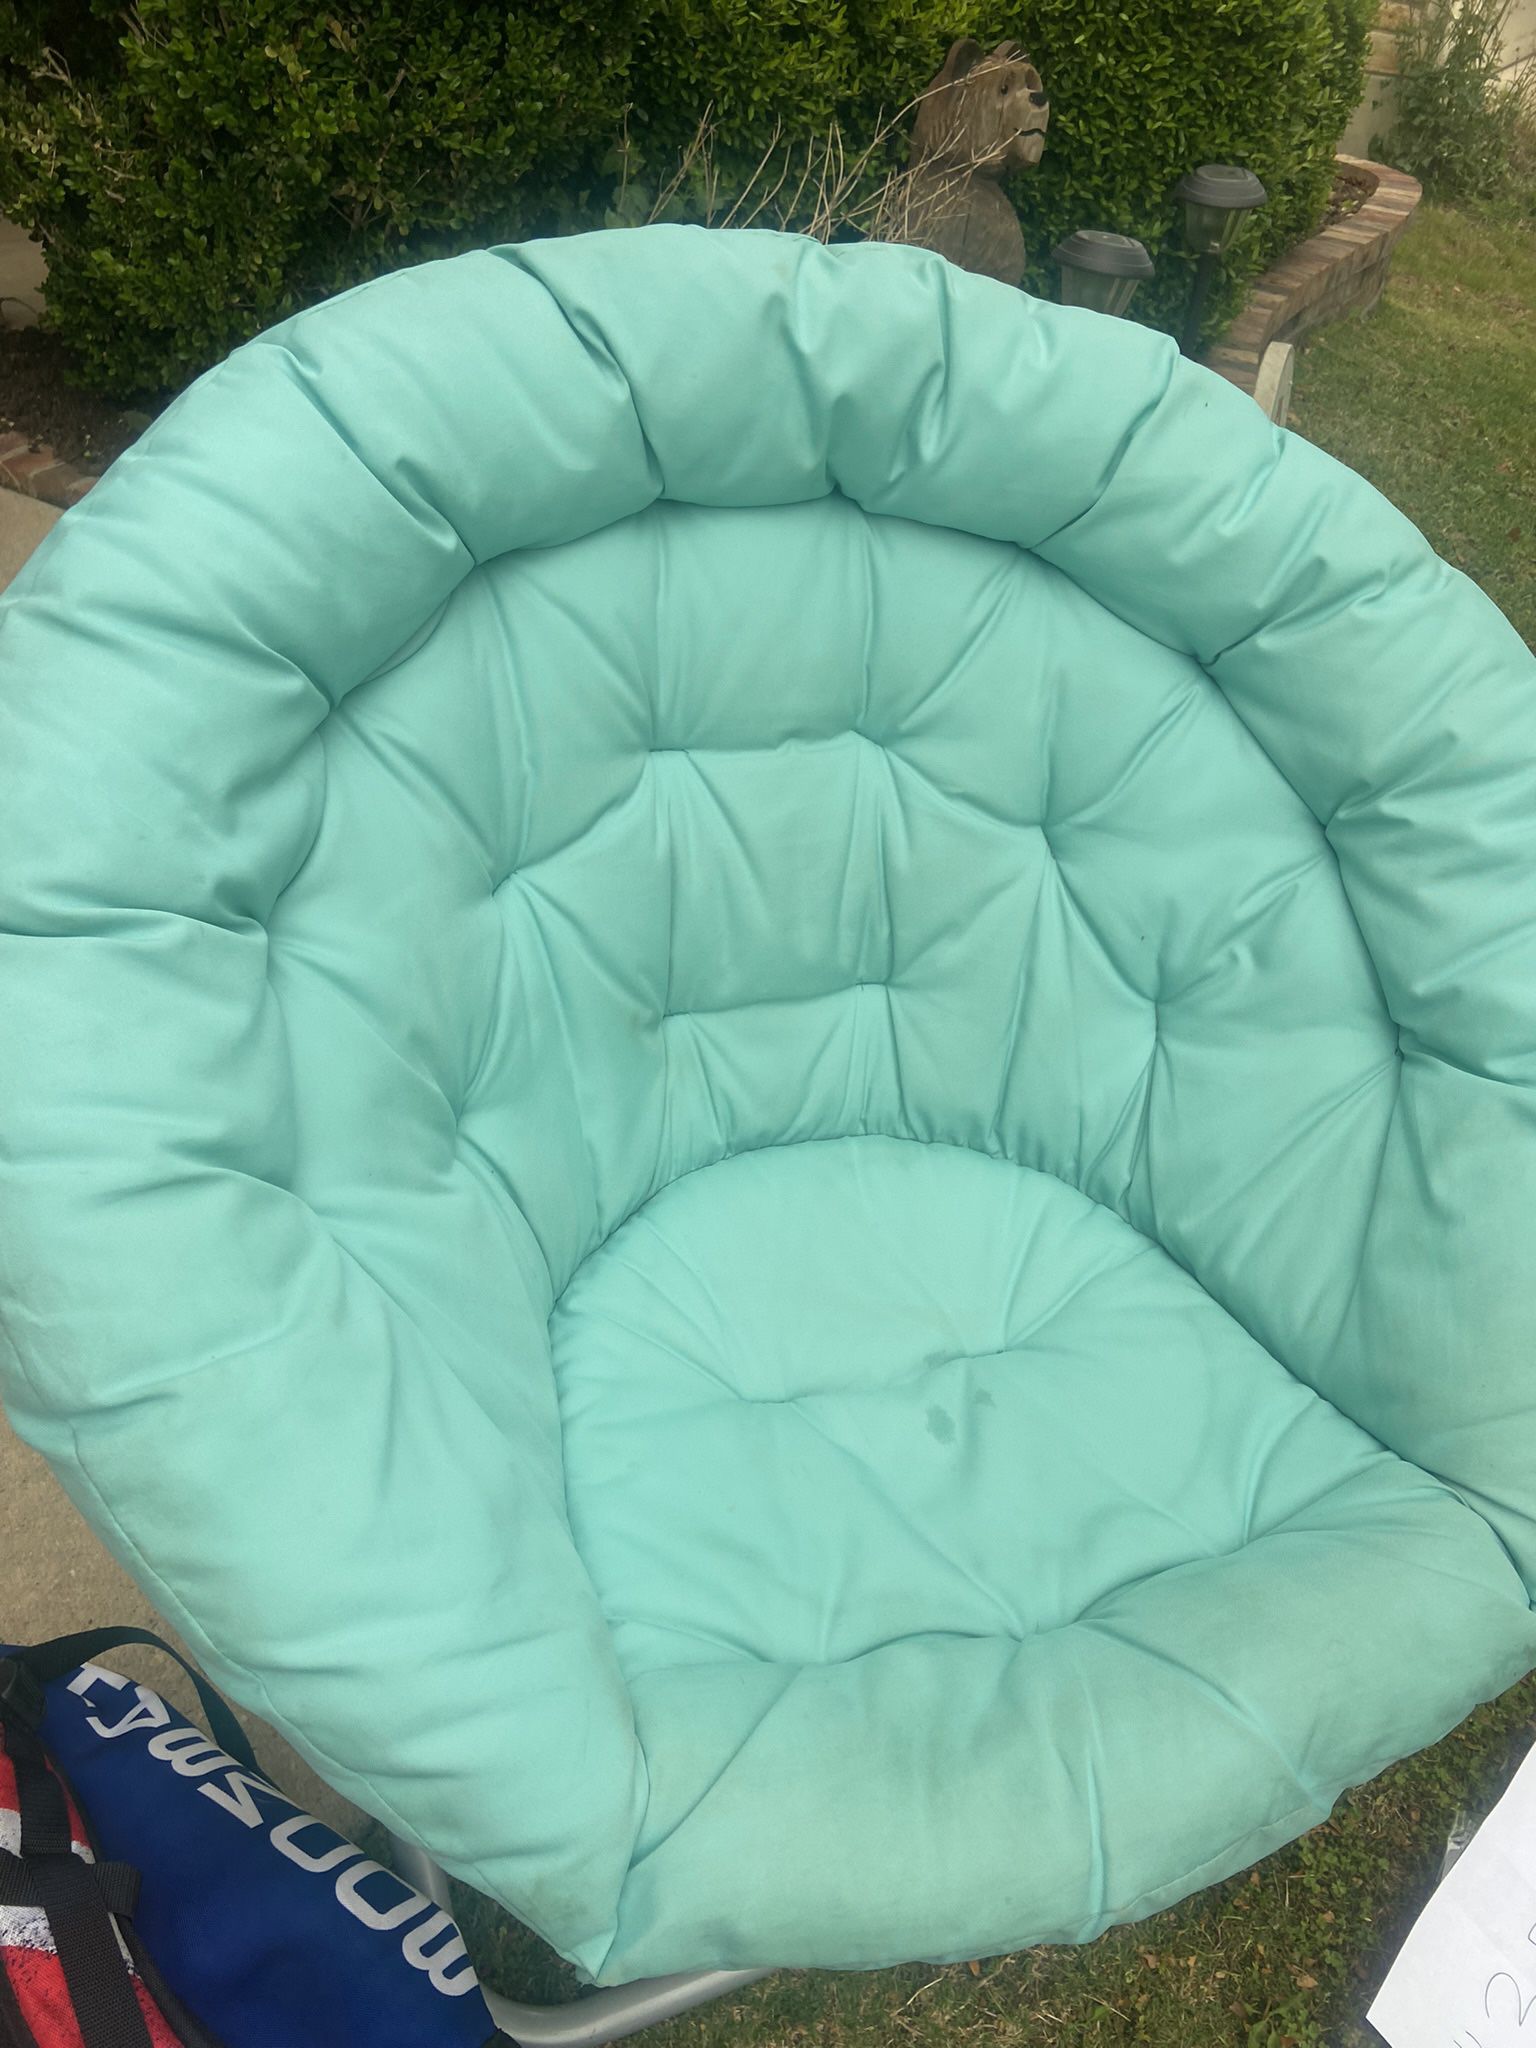 Chair For Teen Or Big Kid